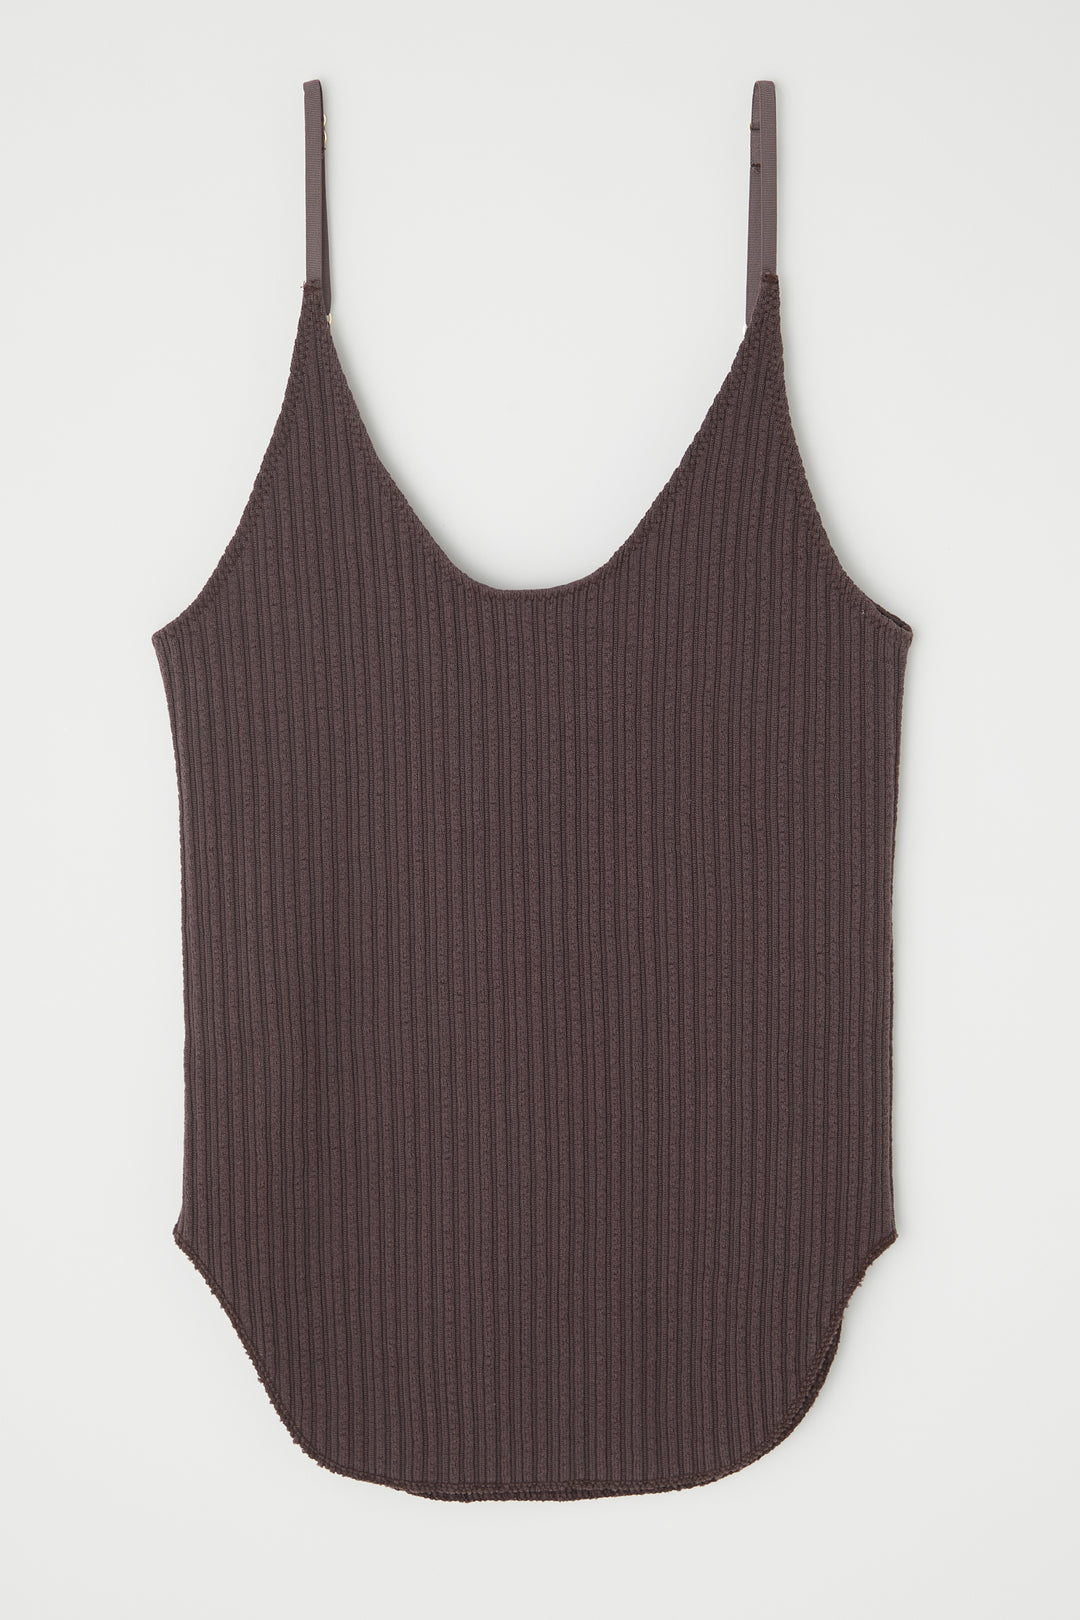 Moussy - Comfort Basic Camisole in Brown